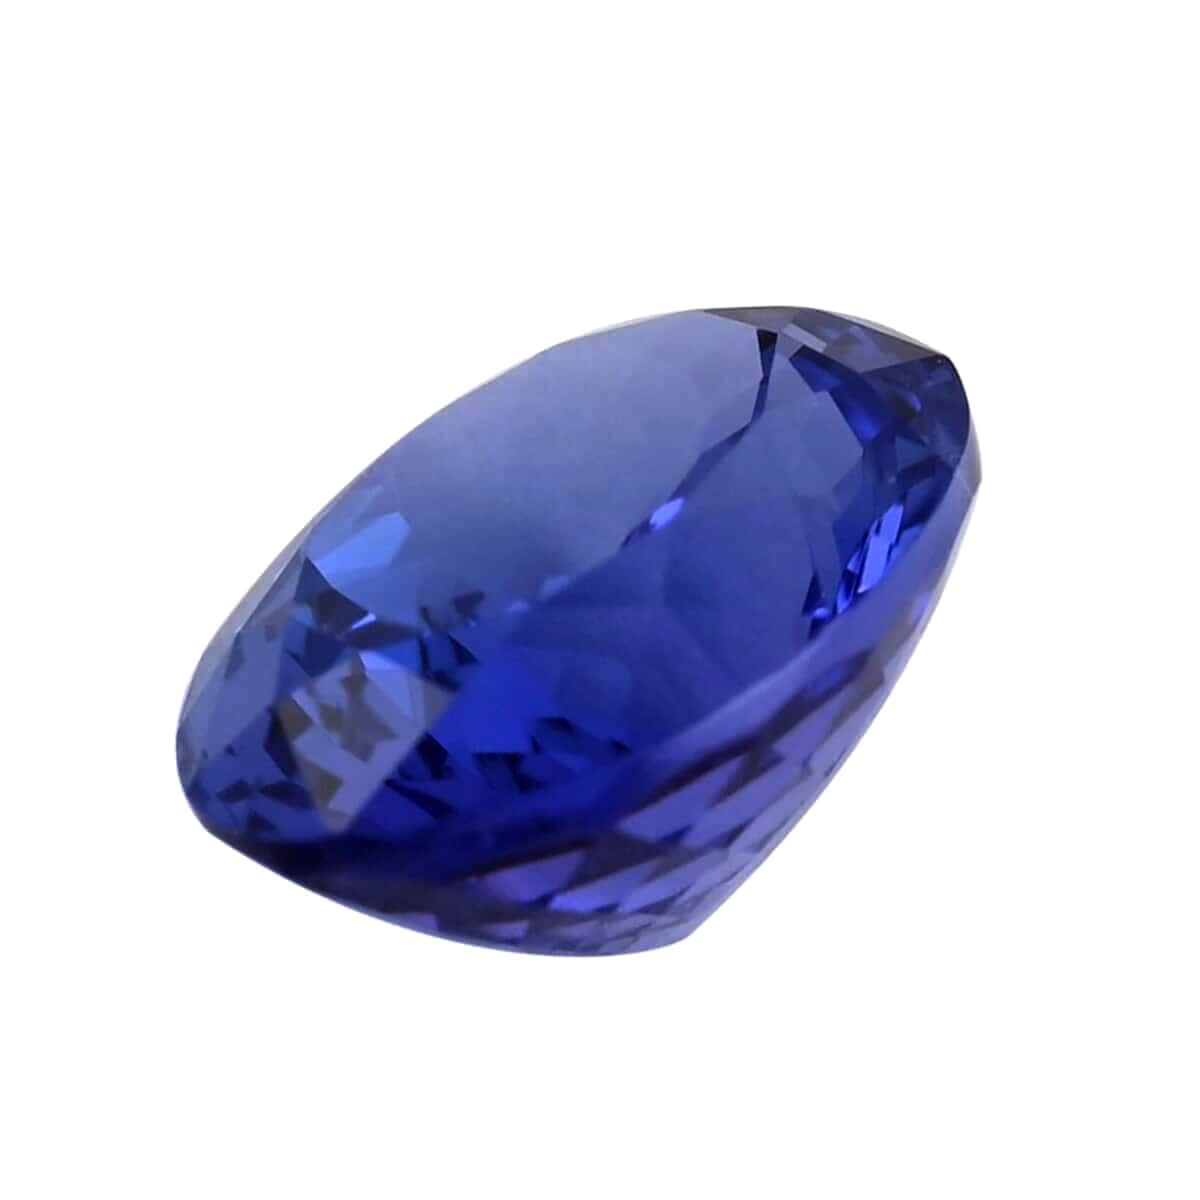 Certified & Appraised AAAA Vivid Tanzanite (Ovl Free Size) Approx 3.00 ctw, Loose Gemstones, Gemstone For Jewelry, Jewelry Stones, Tanzanite Gemstone For Jewelry Making image number 1